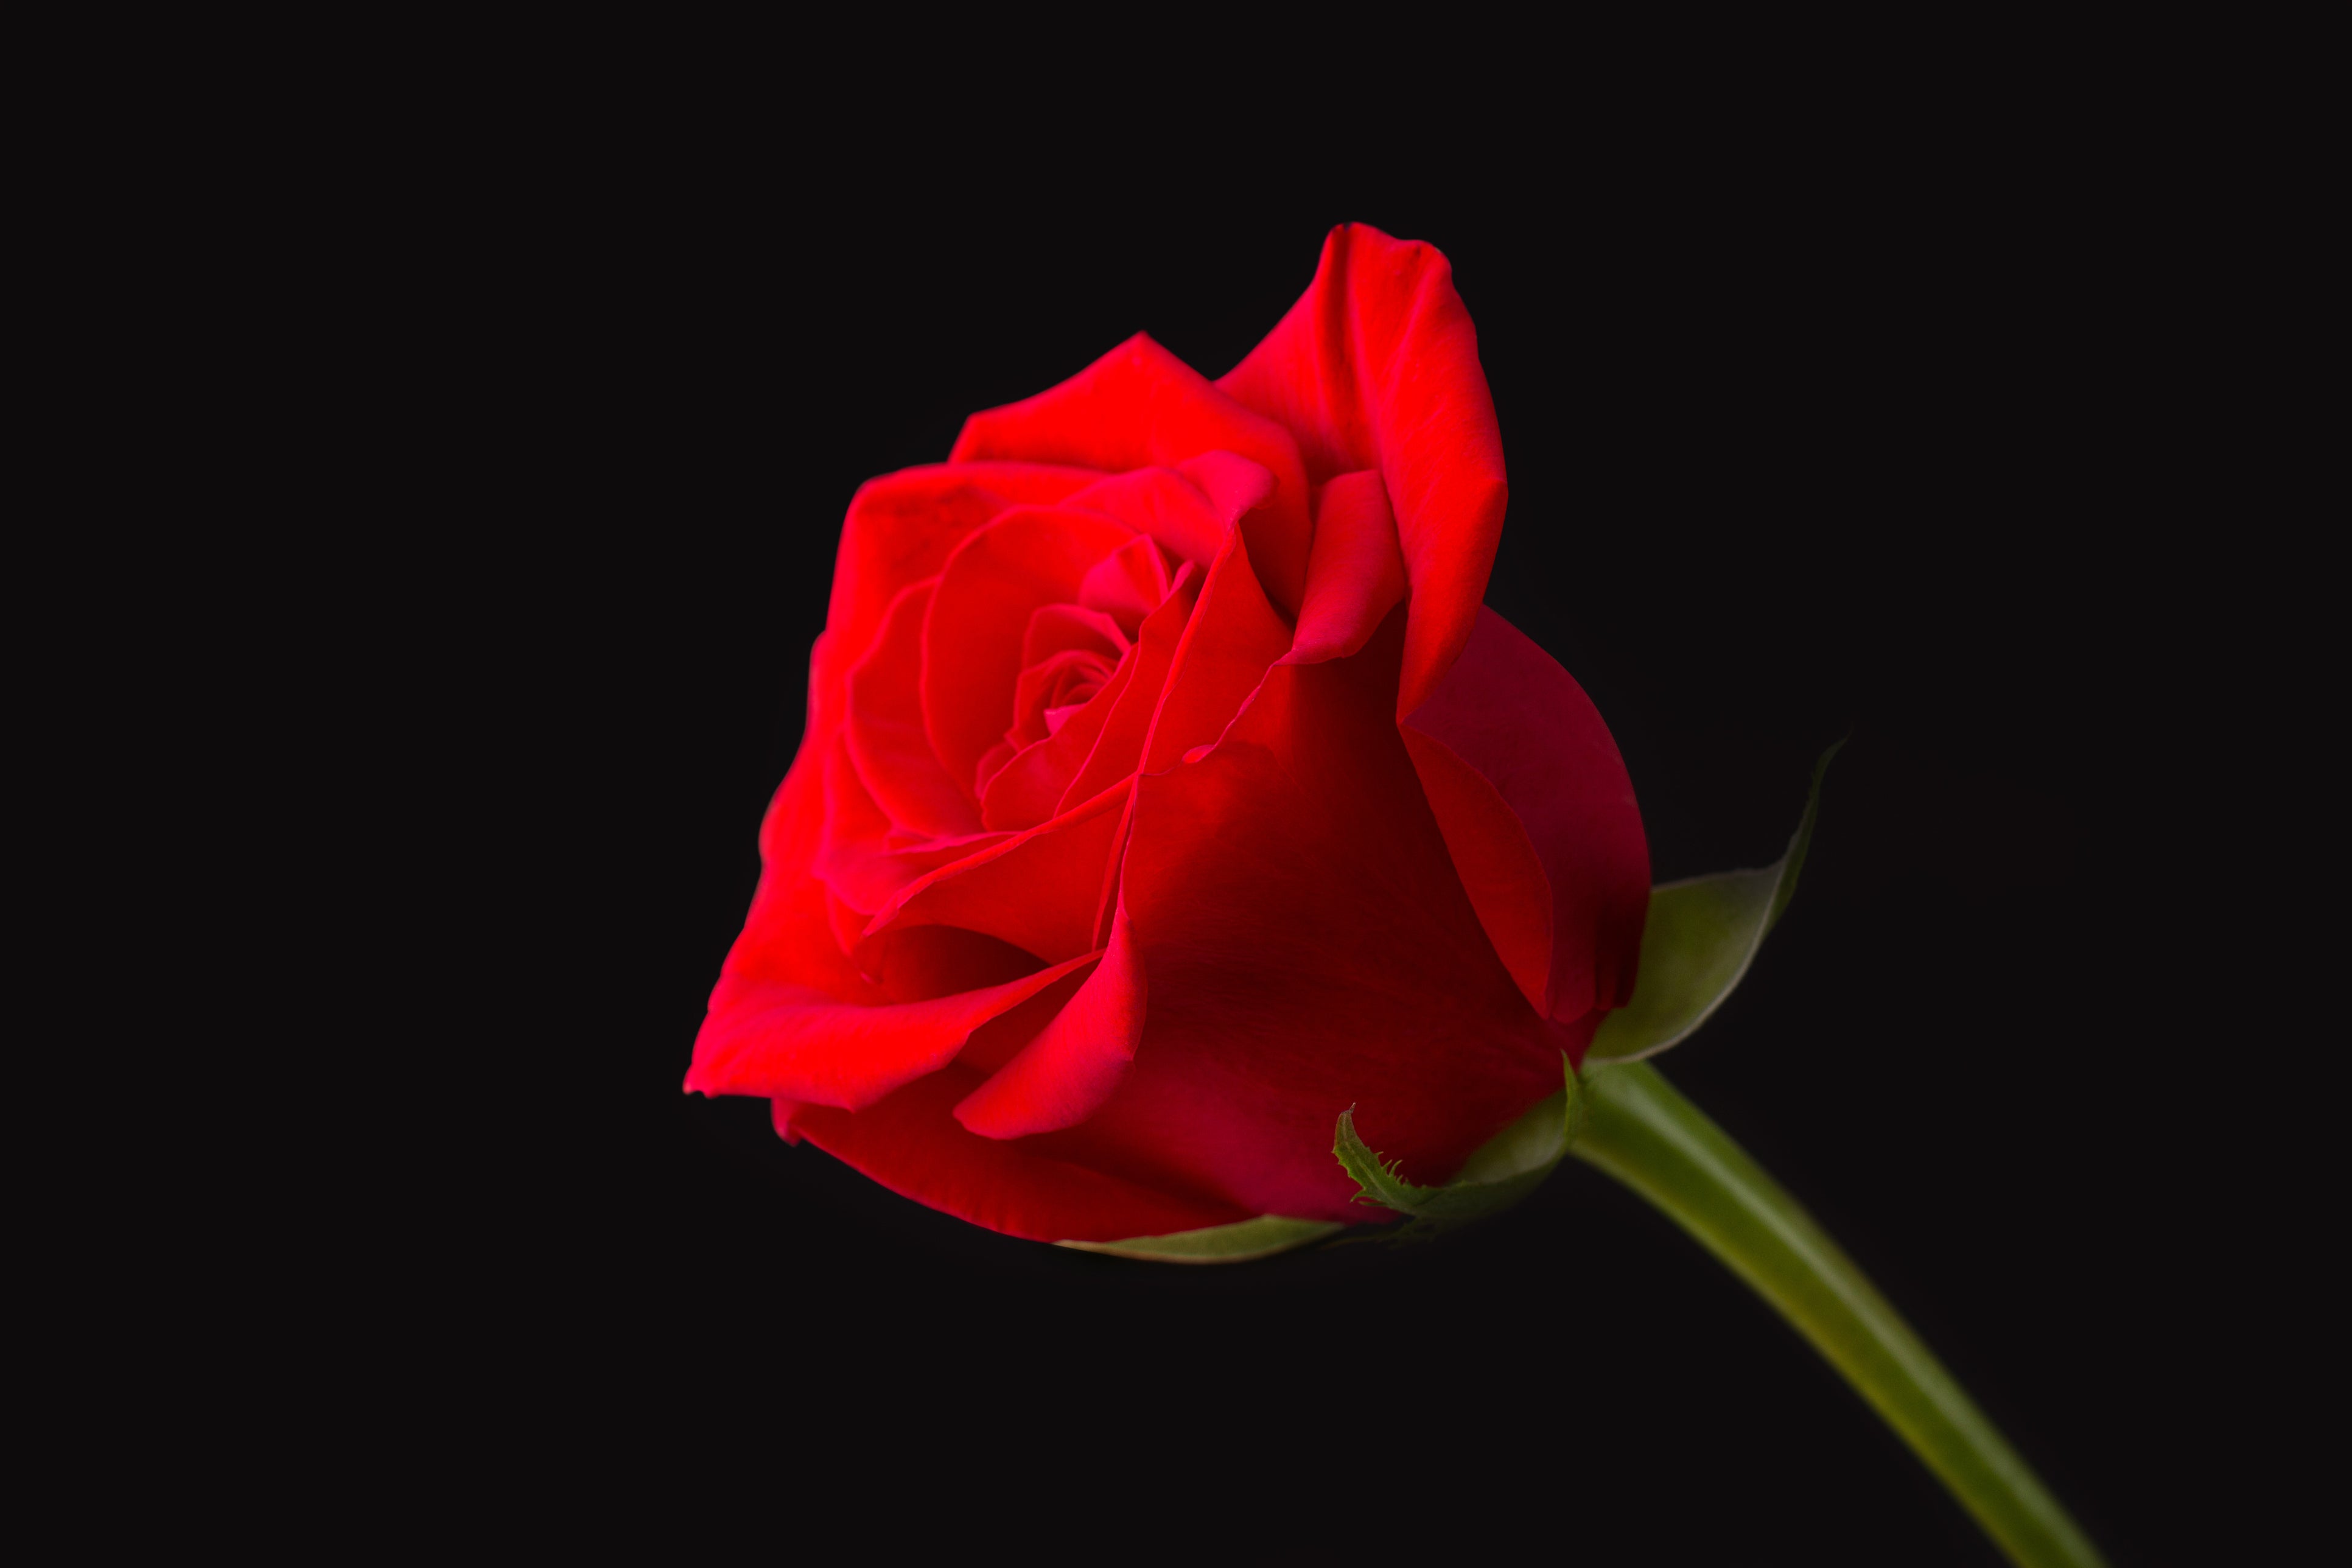 A red rose against a black background.